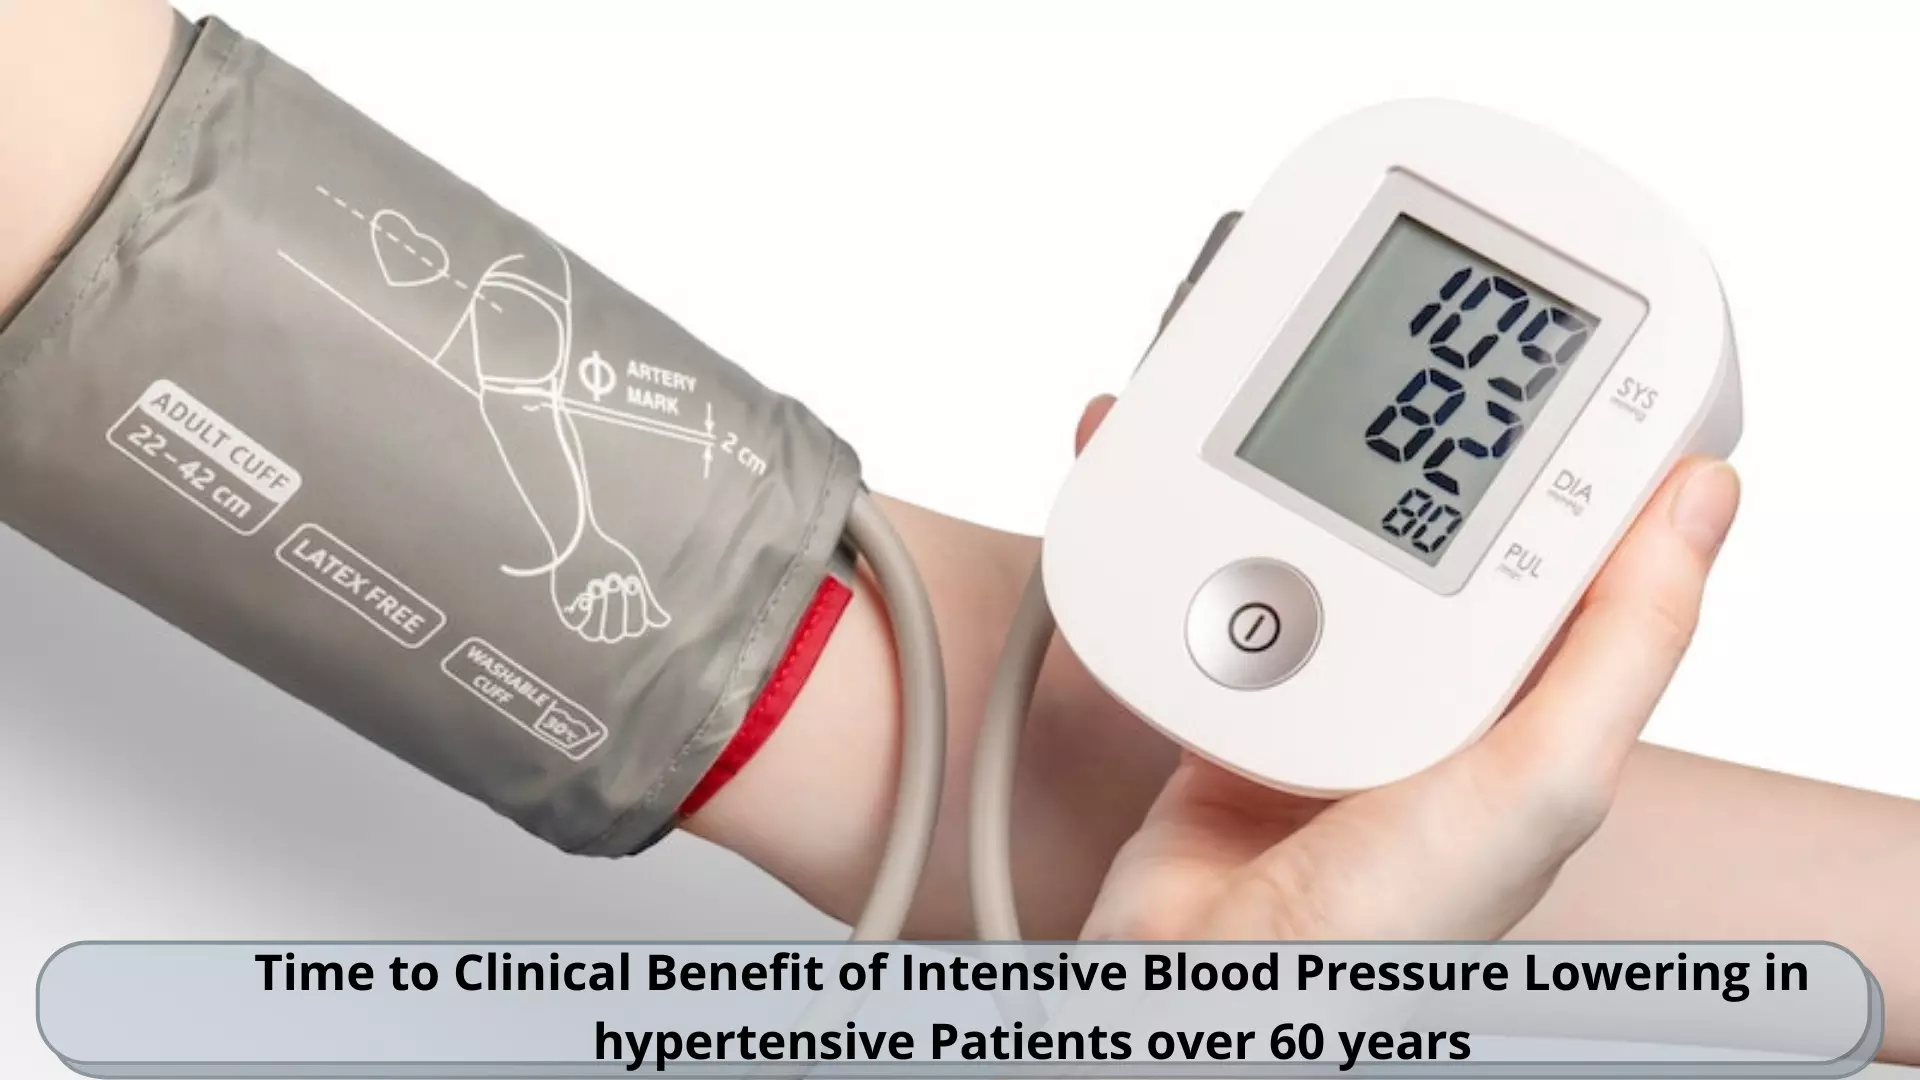 Clinical Benefit of Intensive Blood Pressure Lowering in hypertensive Patients over 60 years